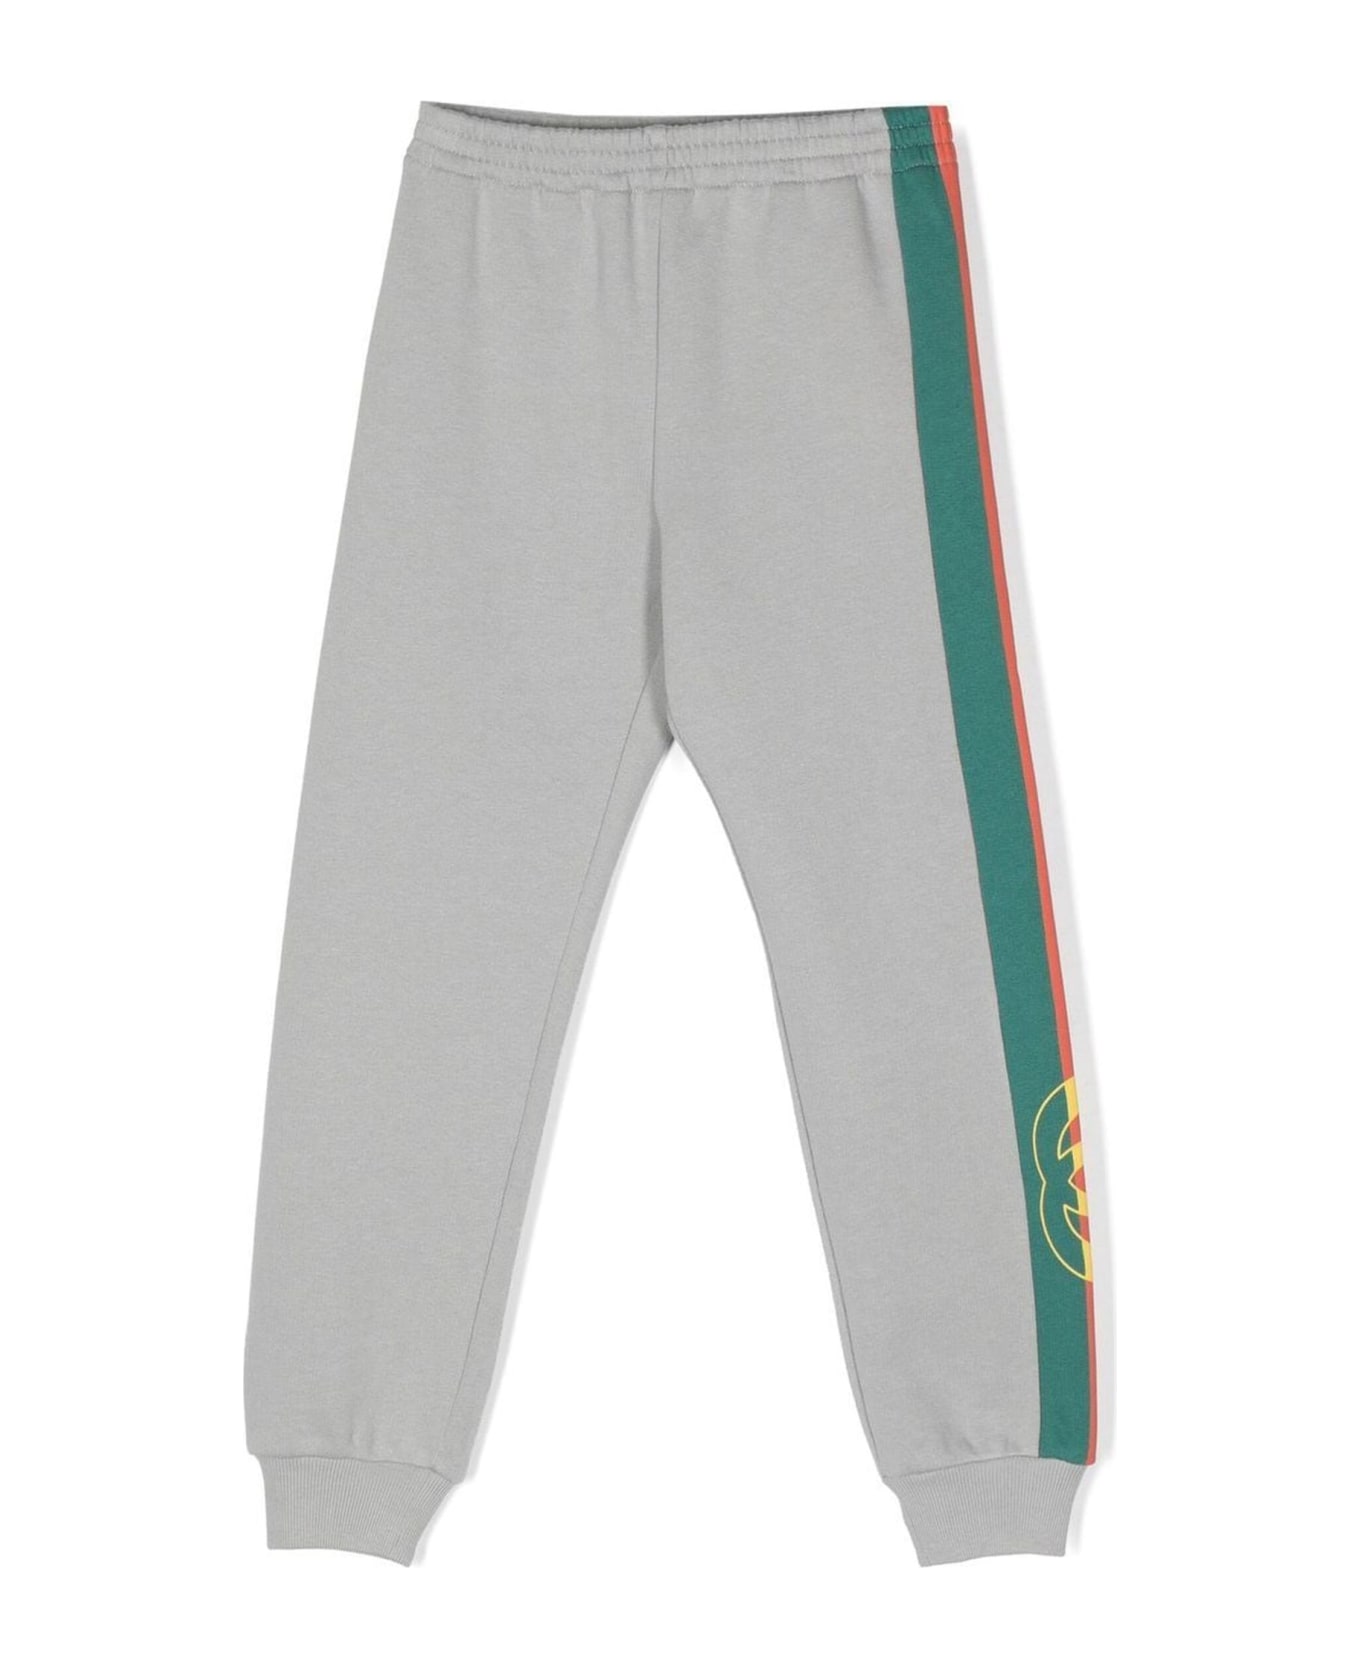 Gucci Grey Cotton Track Pants - Thunderstorm ボトムス